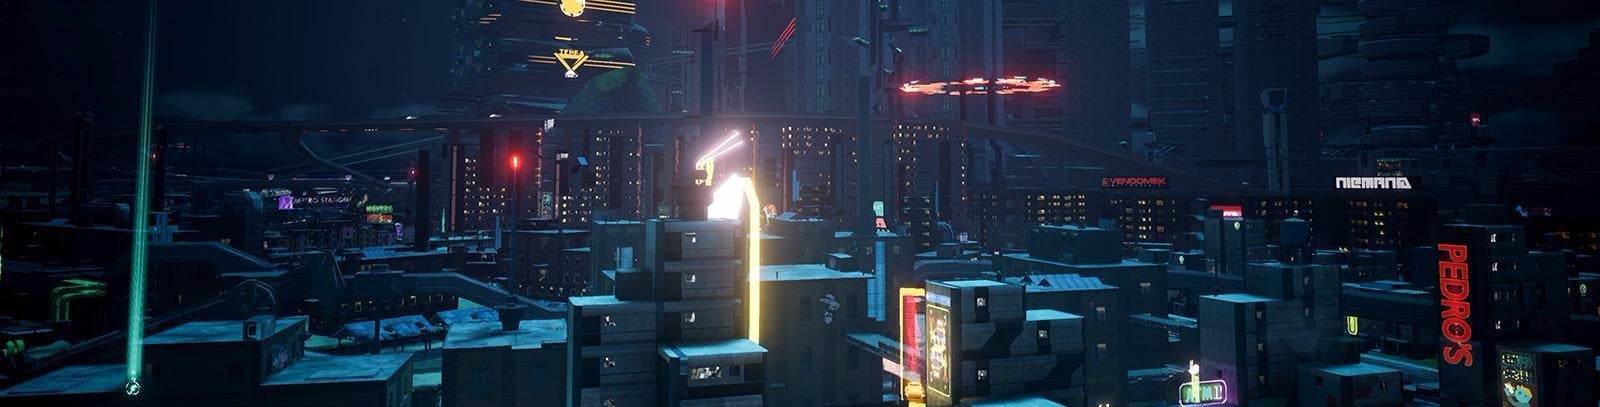 Image for Clearing up confusion surrounding Crackdown 3 destruction